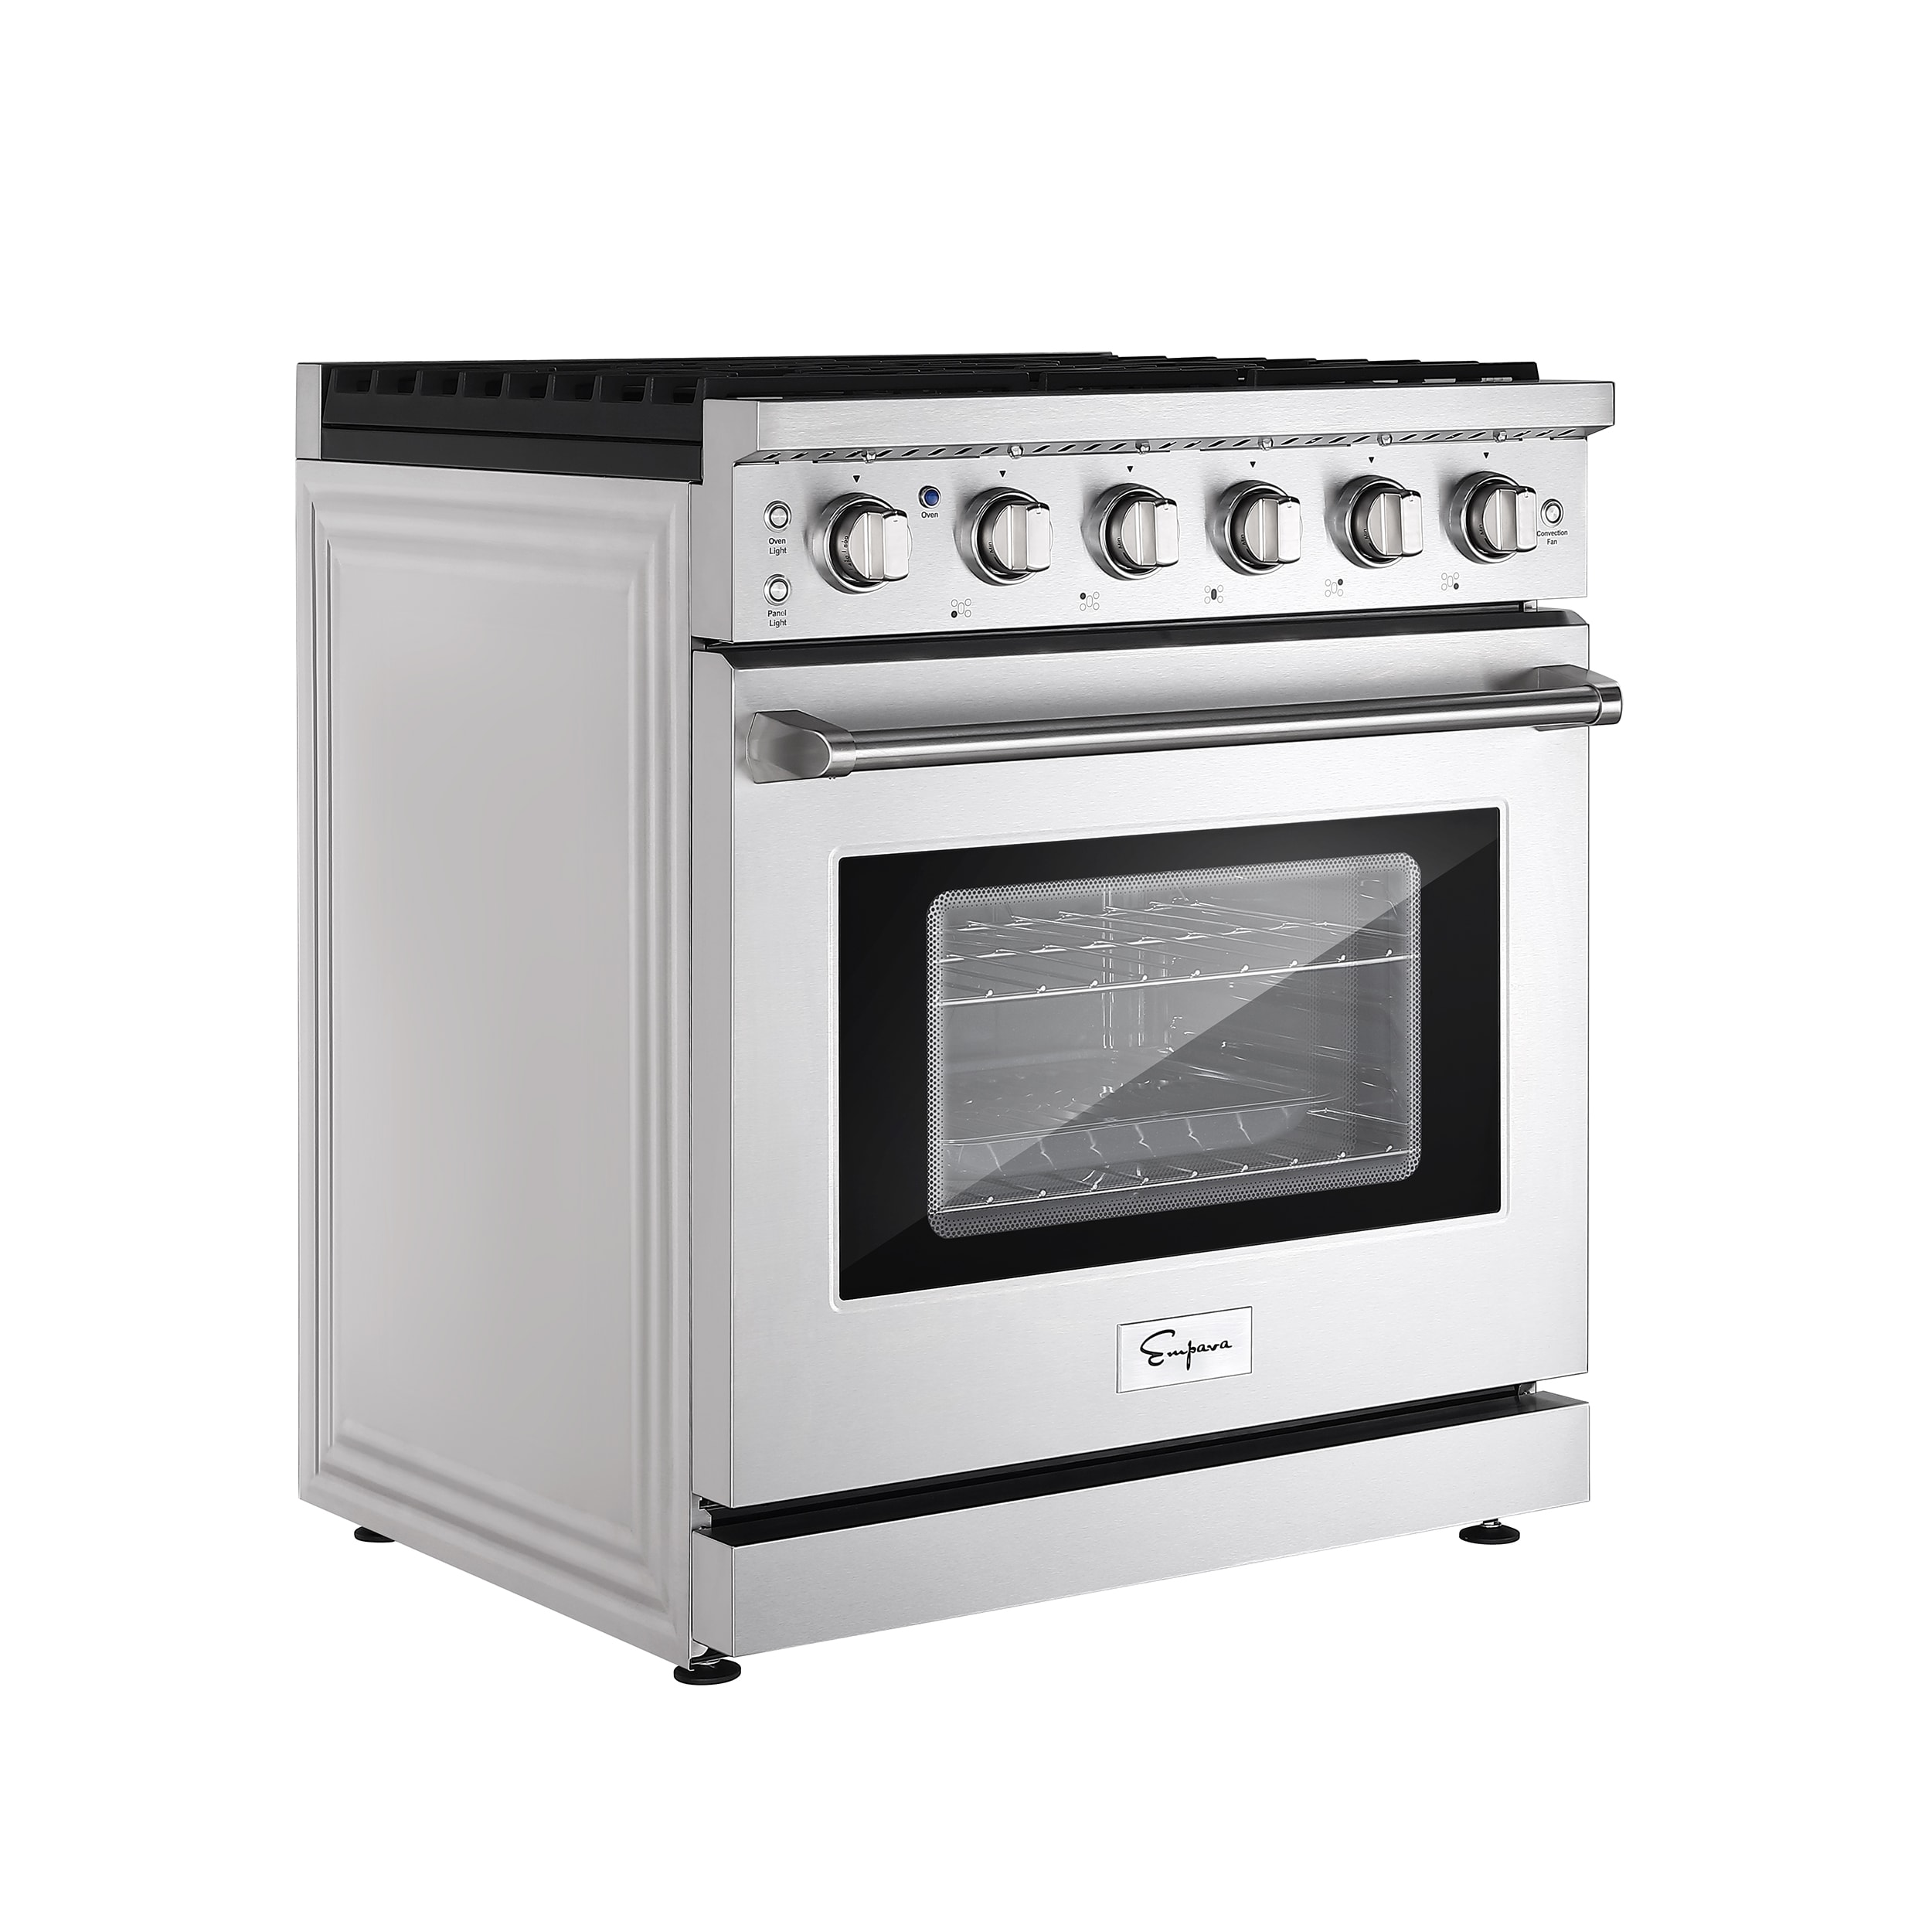  Empava 30 Inch Slide-In Freestanding Gas Range with 4 Sealed  Burners Cooktop-4.2 Cu. Ft. Convection Oven Capacity with Mechanical Knobs  Control-Heavy Duty Cast Iron Grates in Stainless Steel : Appliances